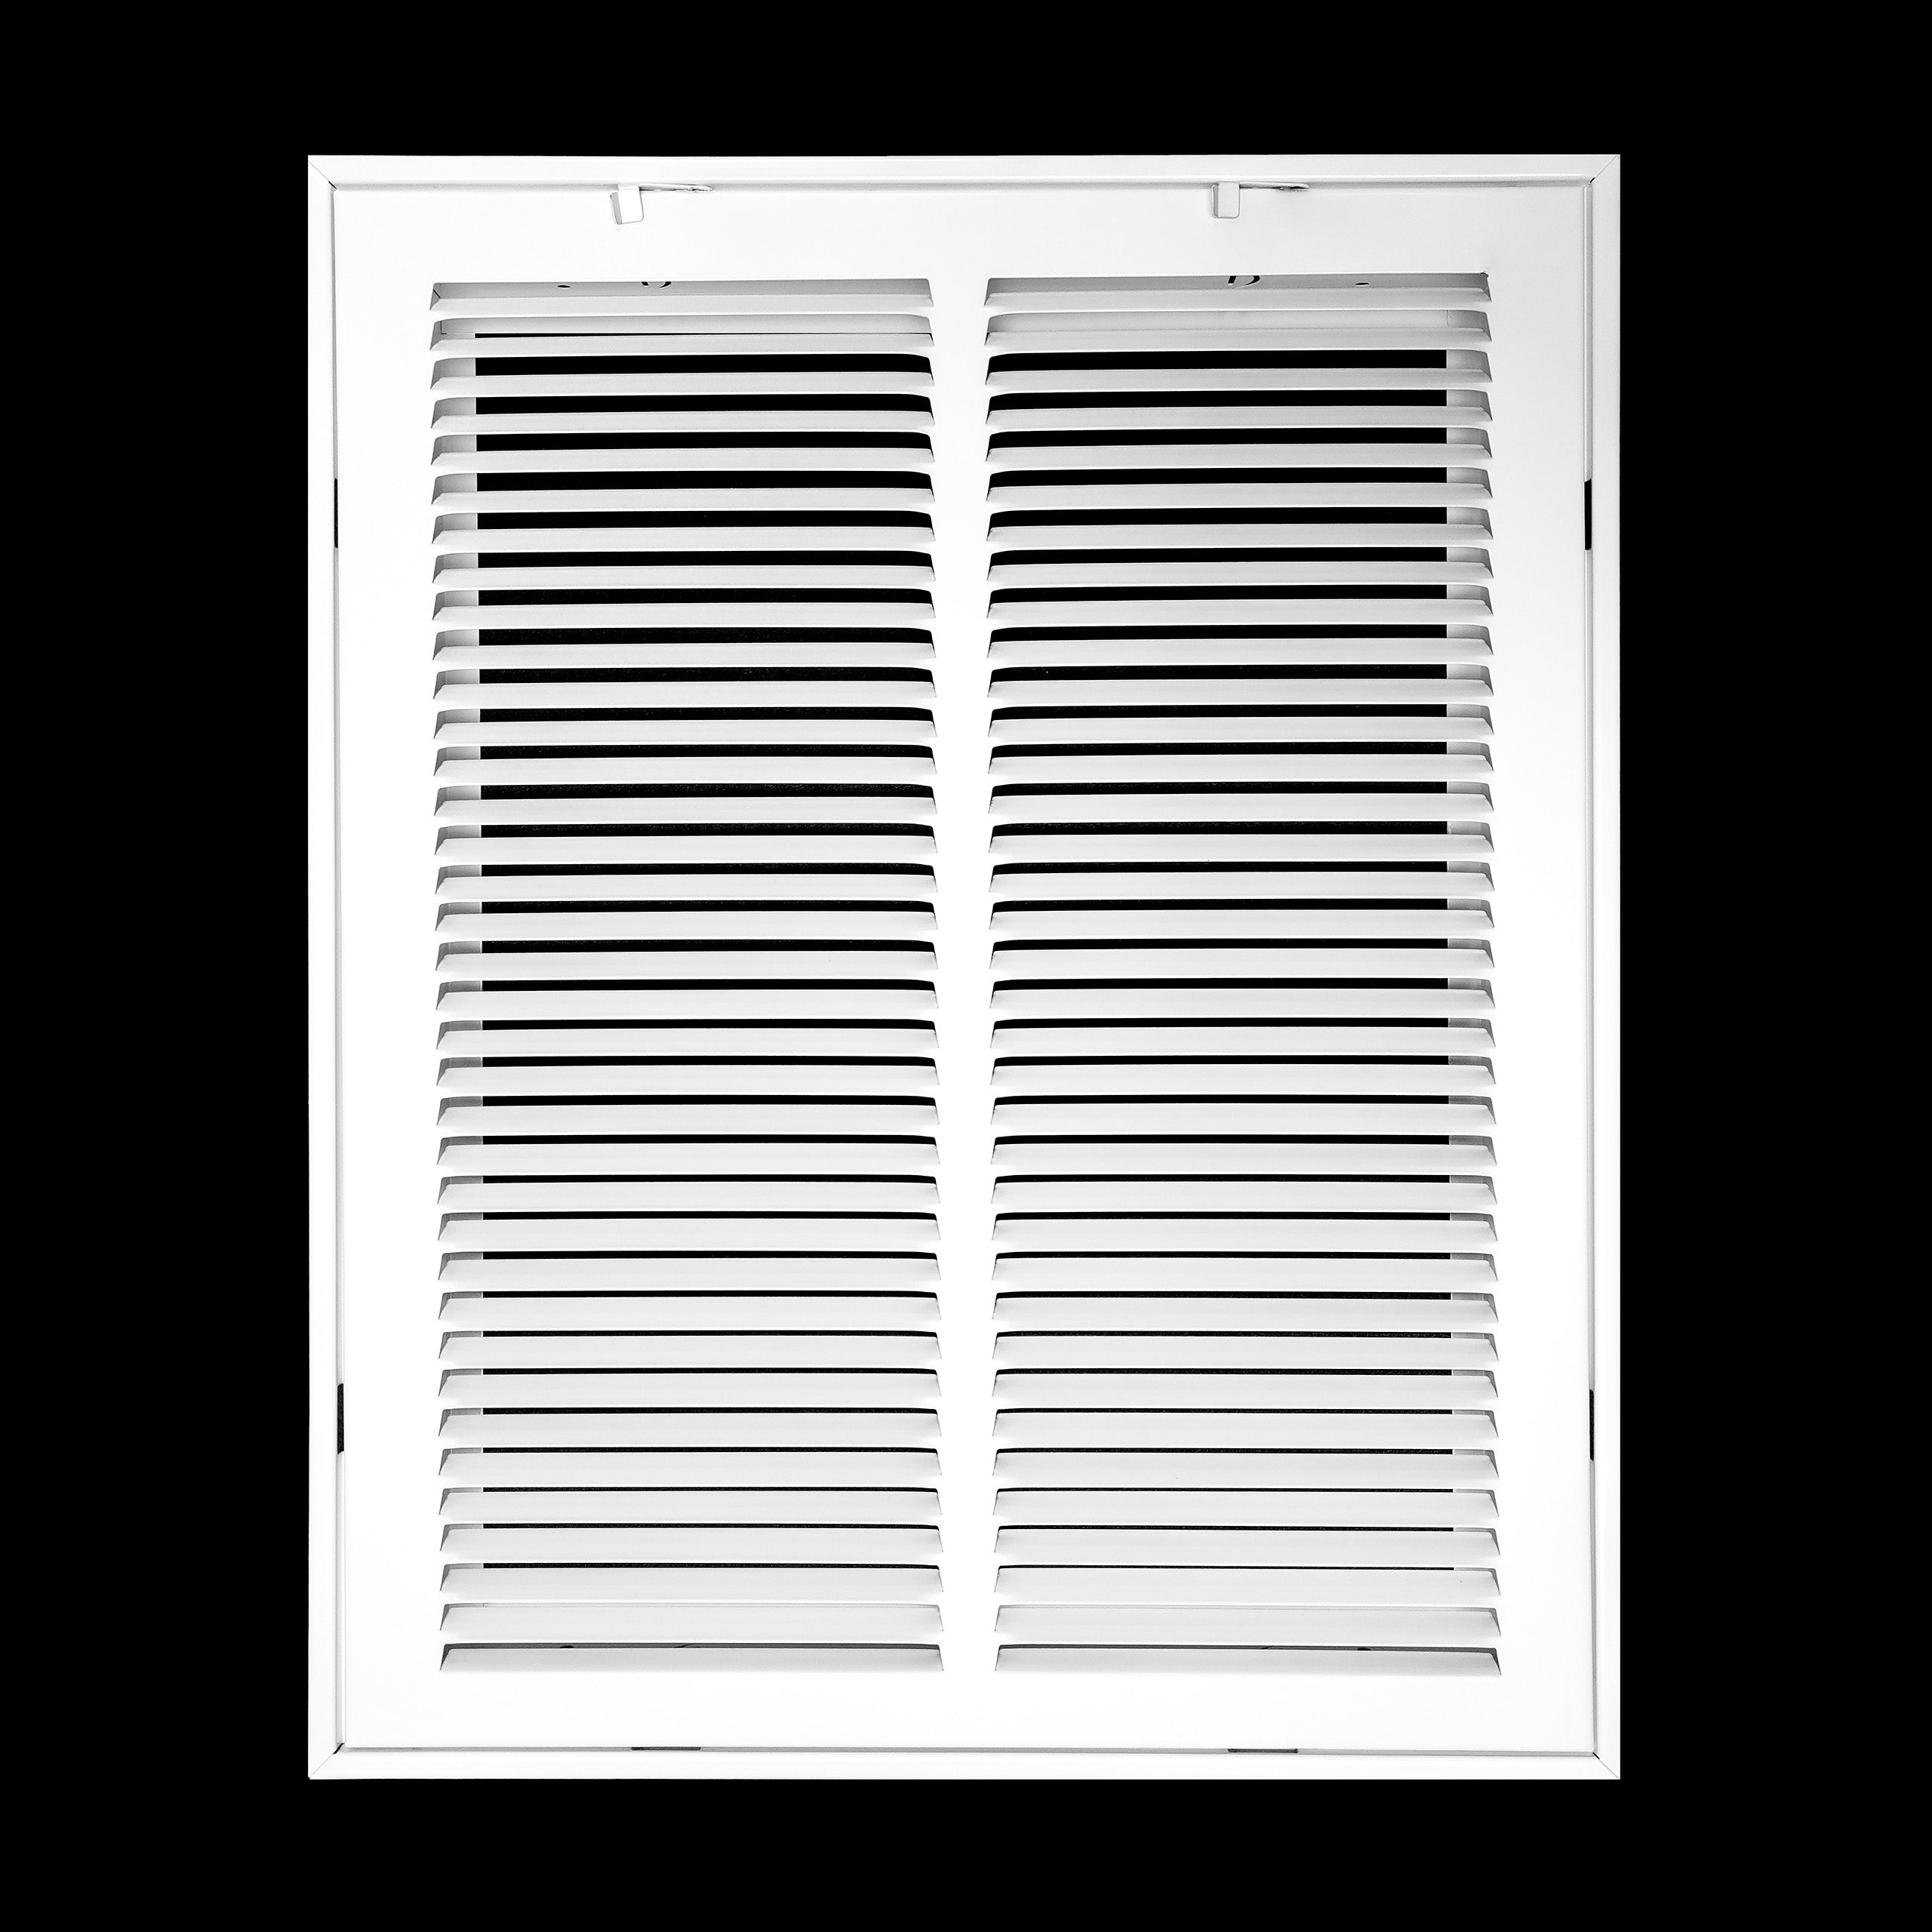 airgrilles 14" x 18" duct opening  -  steel return air filter grille for sidewall and ceiling hnd-rafg1-wh-14x18 038775628655 - 1